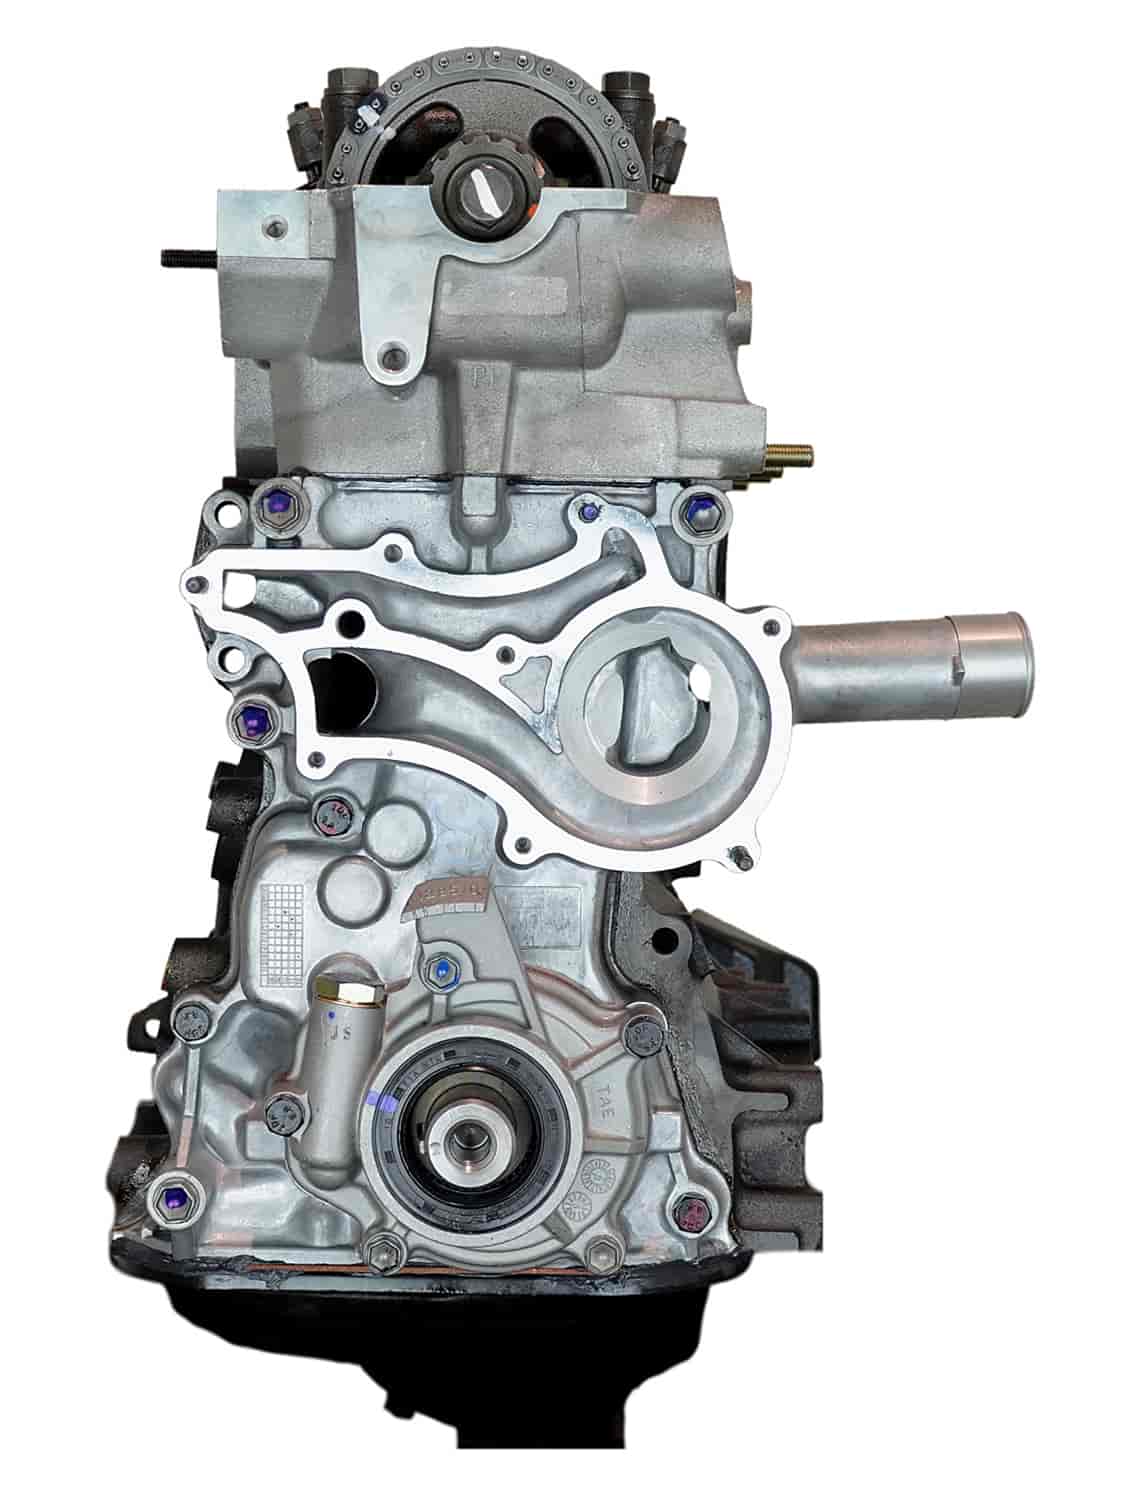 Remanufactured Crate Engine for 1984-1995 Toyota with 2.4L L4 22R